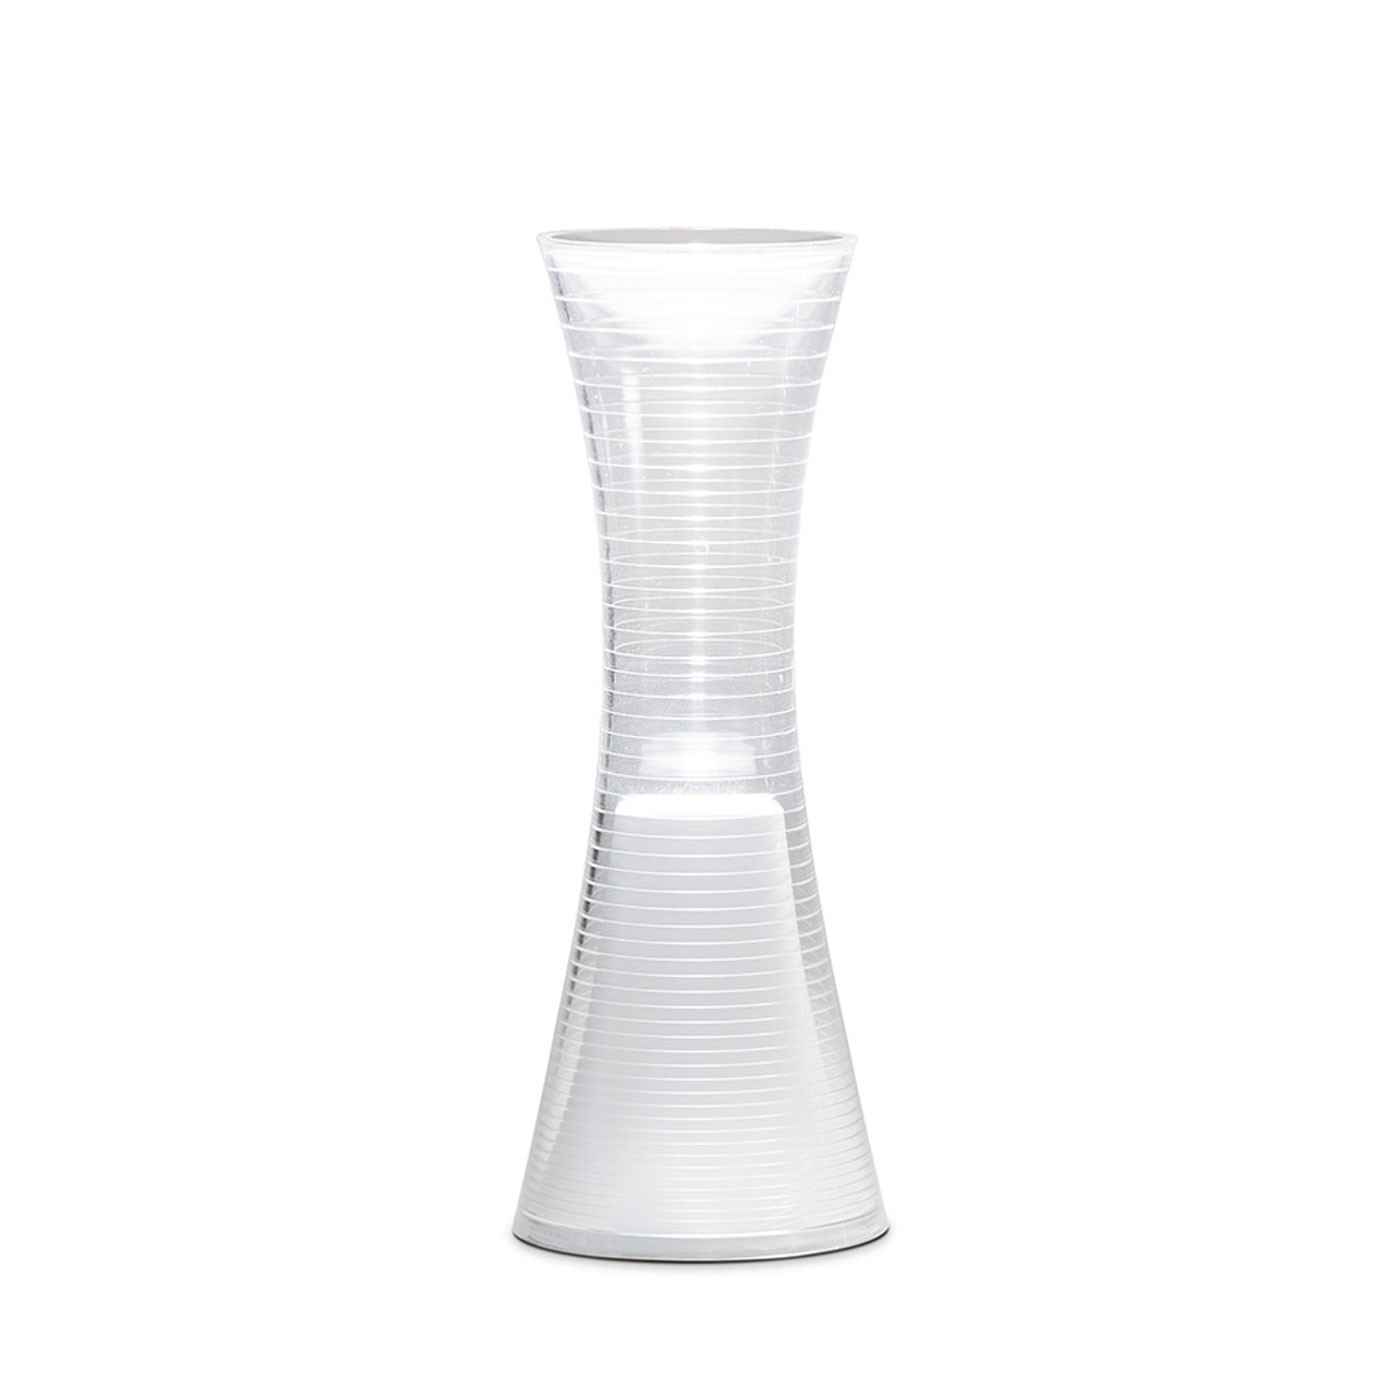 Come Together White LED Table Lamp - Artemide | Eataly.com